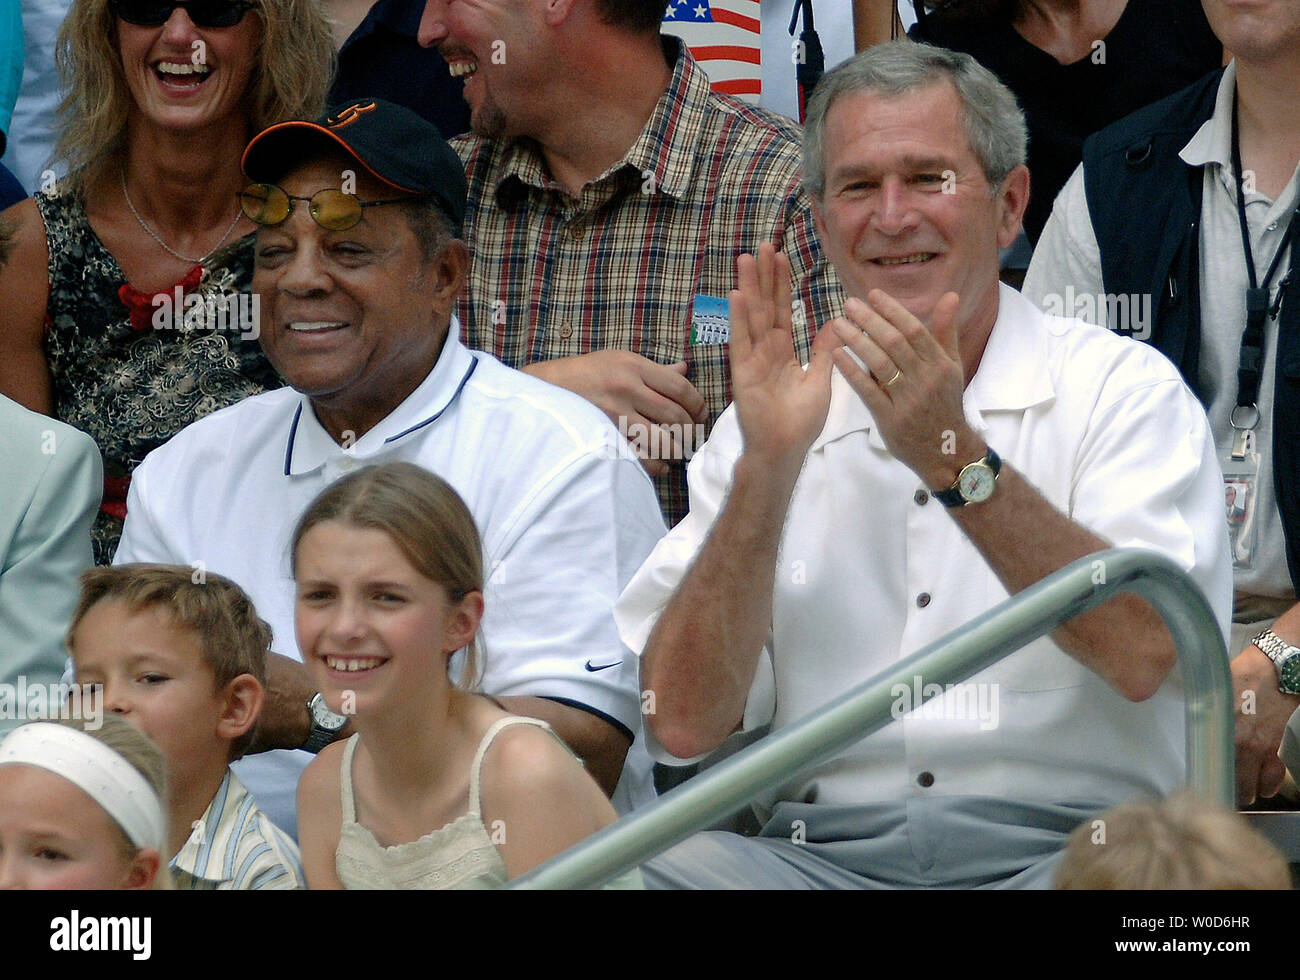 President George W. Bush (R) and National Baseball Hall of Fame member Willie Mays watch the White House Tee Ball Game on the South Lawn at the White House on July 30, 2006. (UPI Photo/Kevin Dietsch) Stock Photo